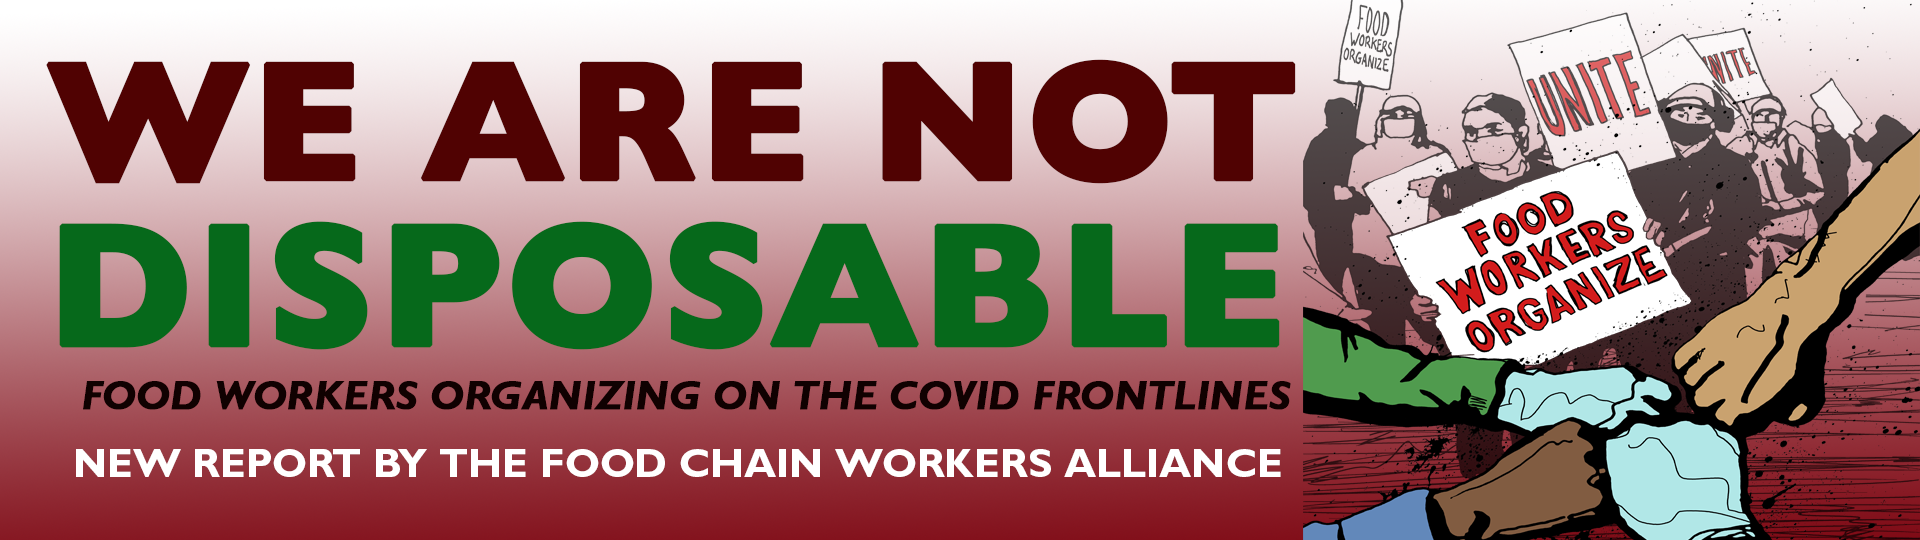 NEW Report: WE ARE NOT DISPOSABLE: Food Workers Organizing on the COVID Frontlines